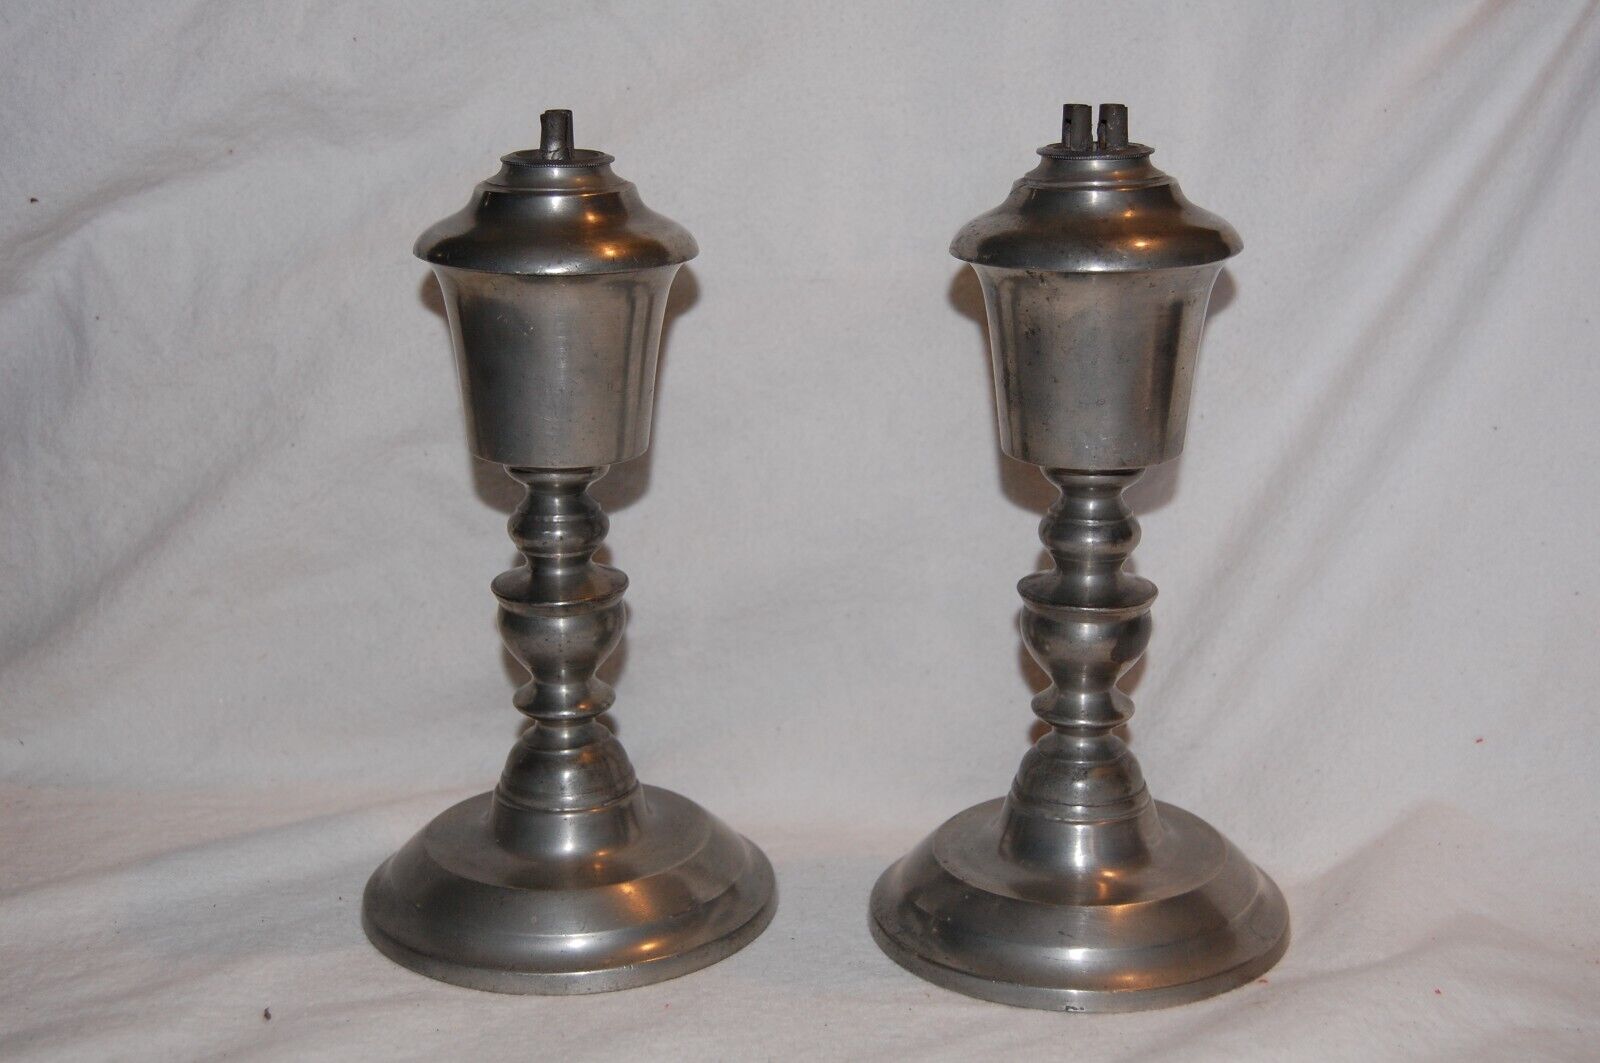 Antique Pair of Pewter Whale Oil Lamps 19th Century Rufus Dunham Portland Maine.